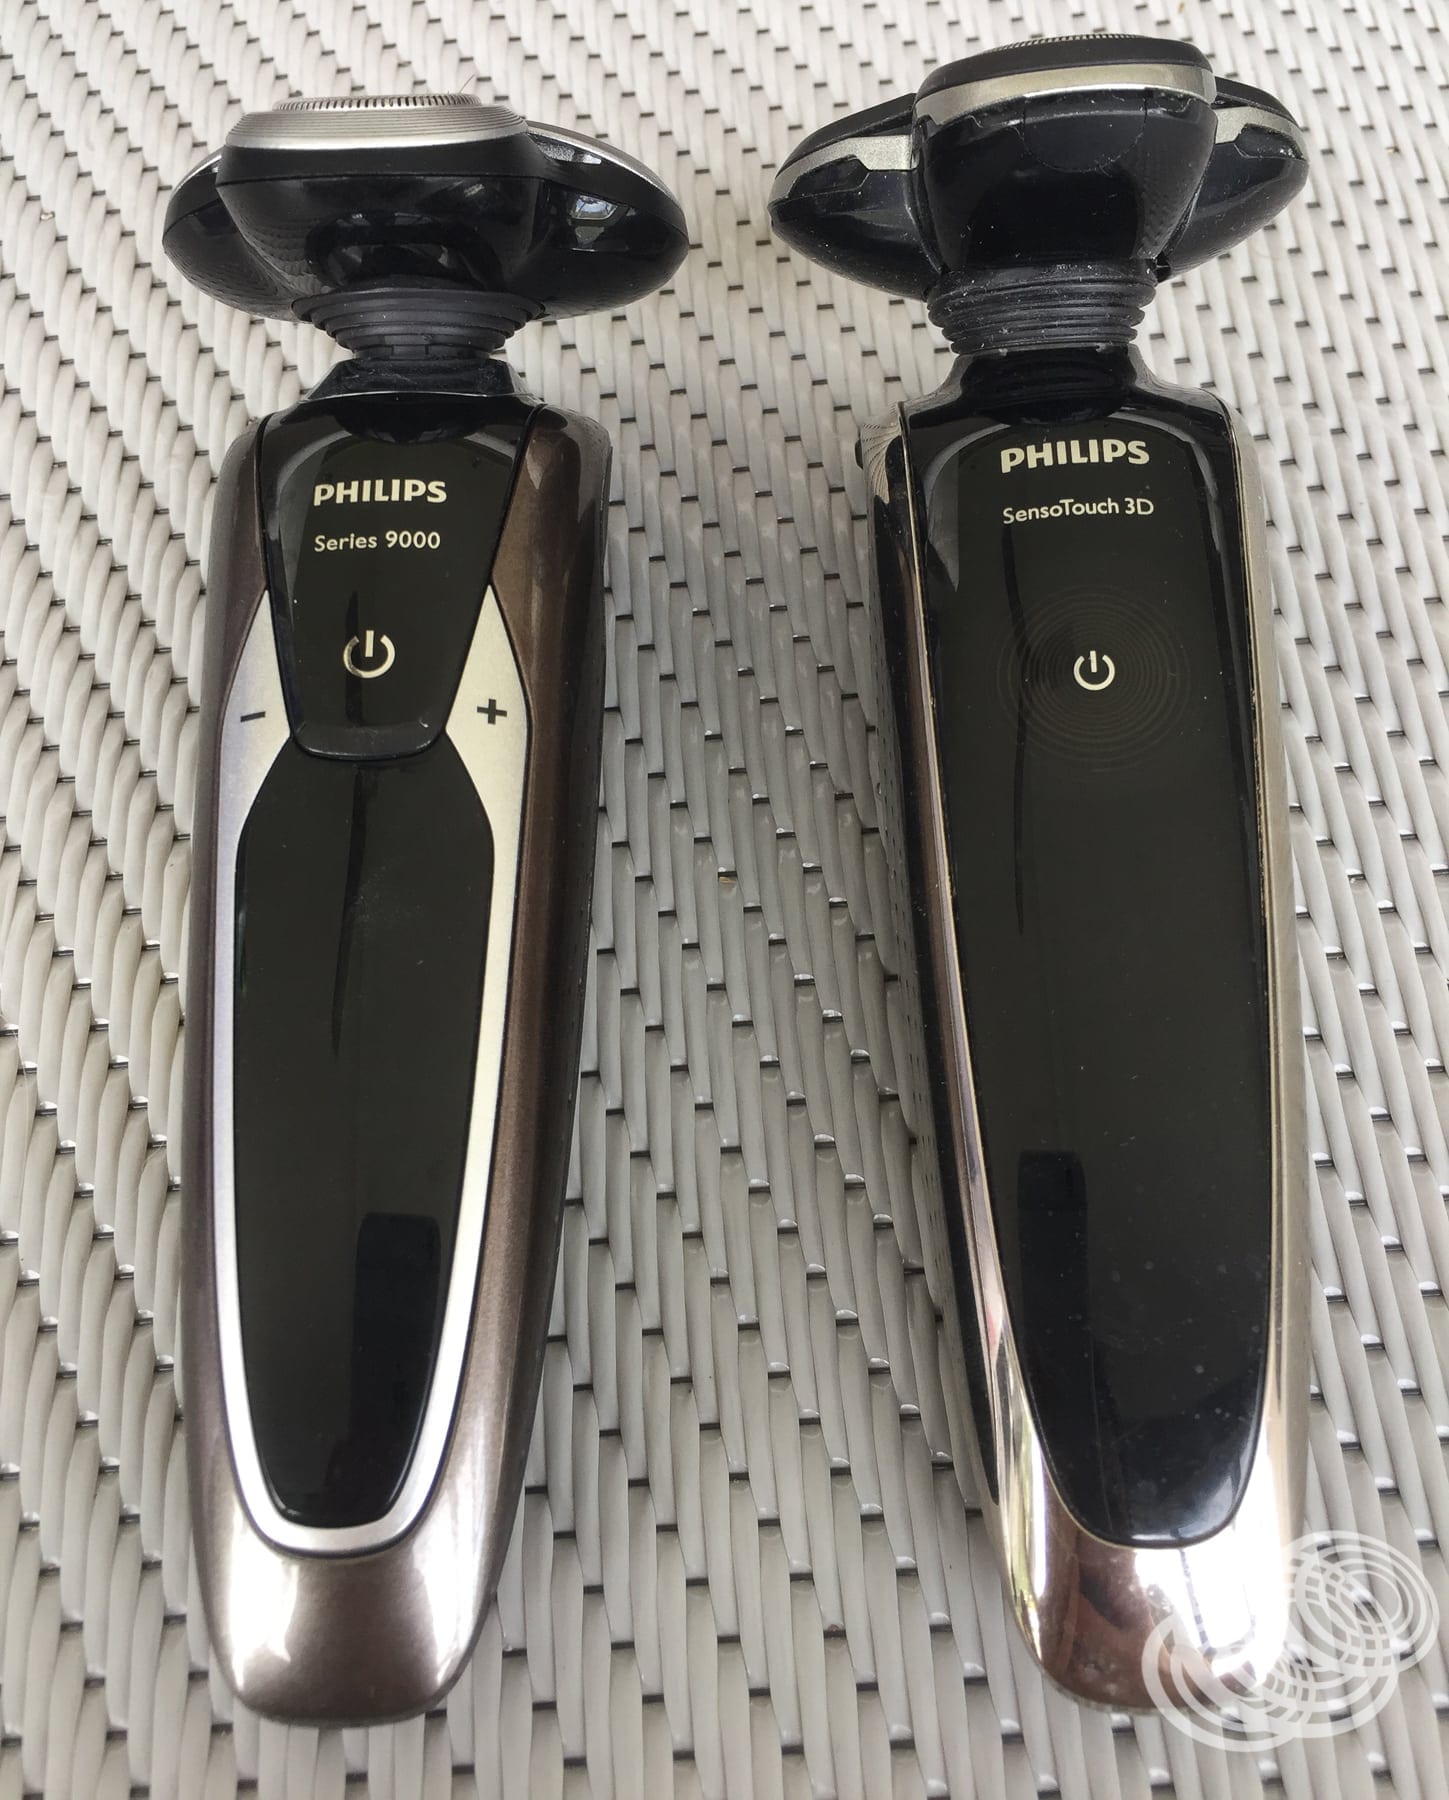 The new Philips 9000 Series (left) side-by-side with the SensoTouch 3D (right).